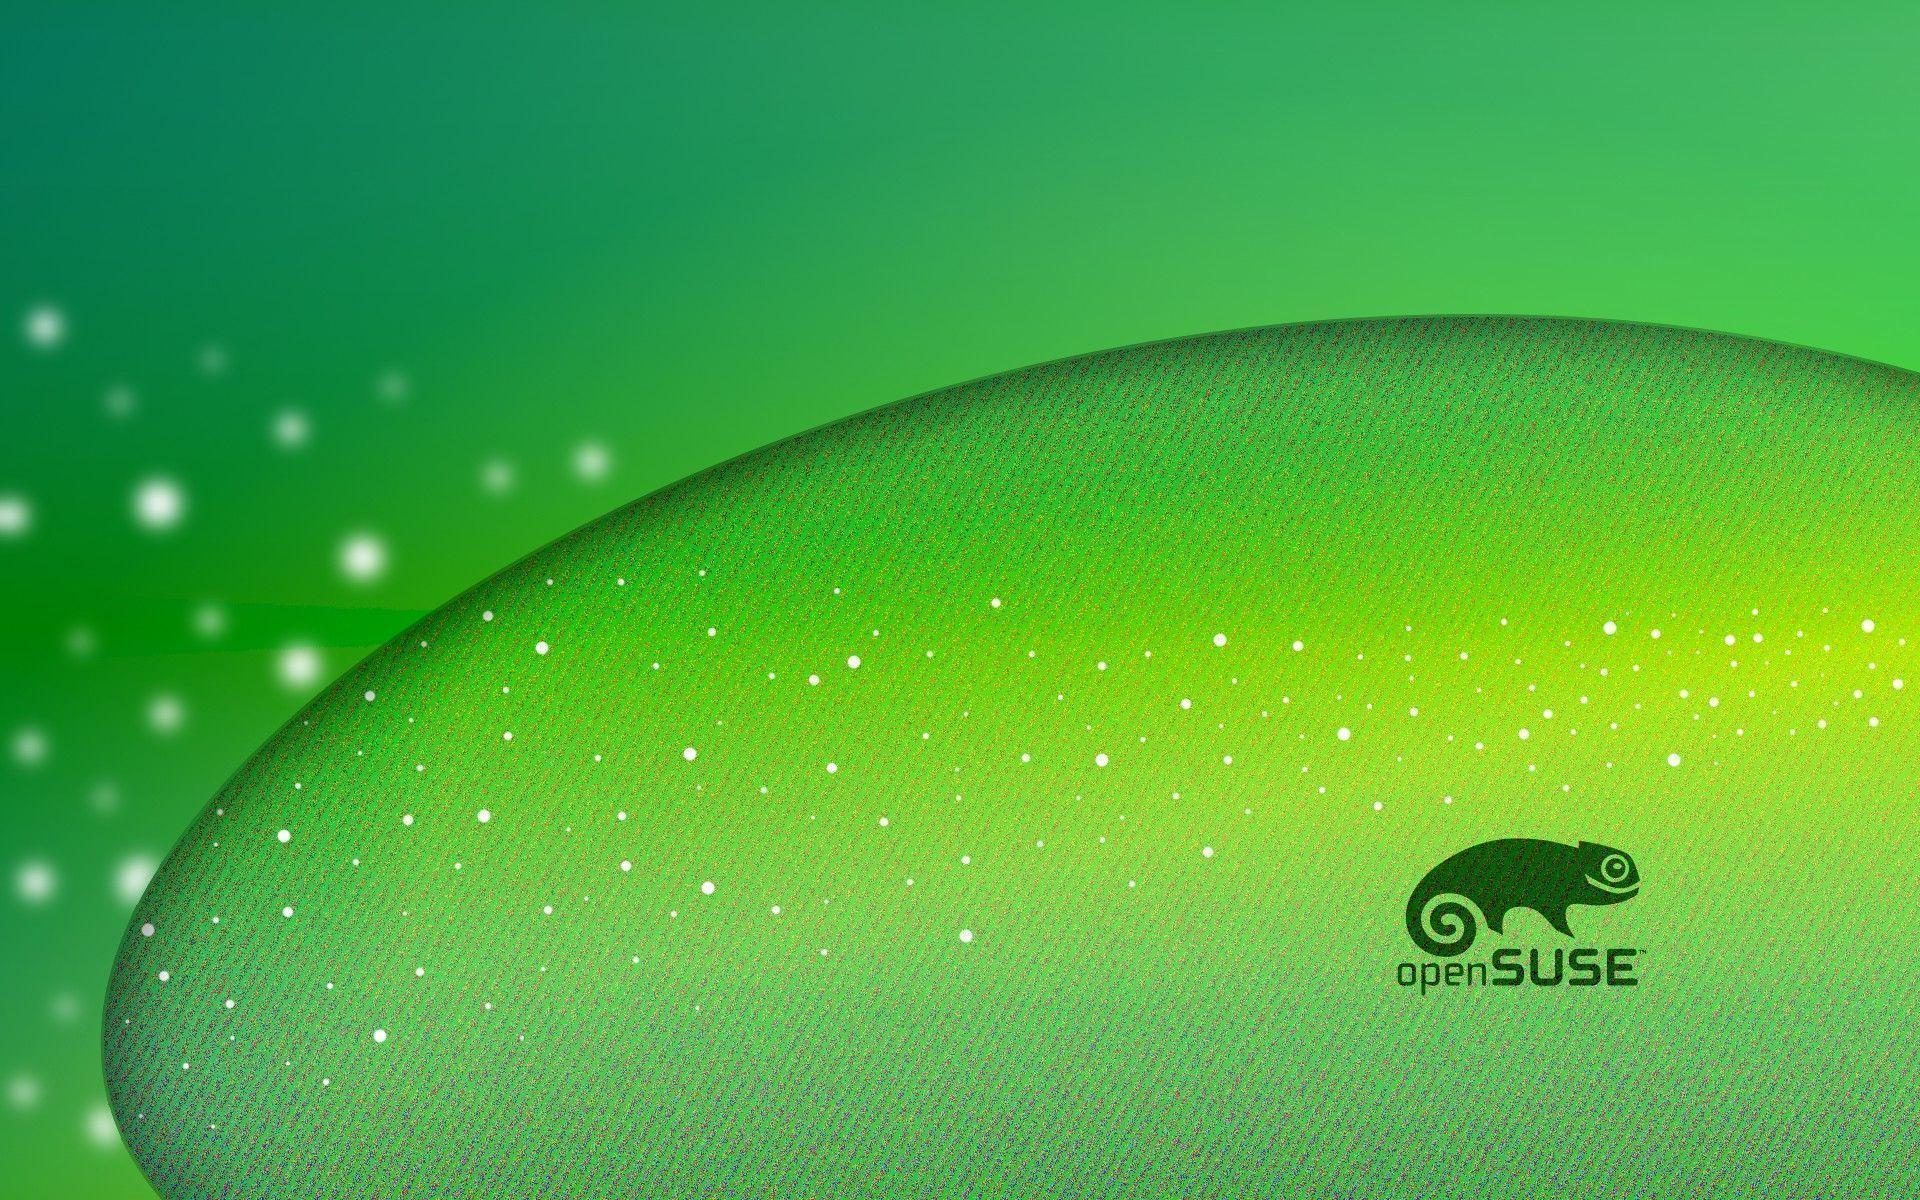 Suse Linux Wallpaper On Funny Suse Linux Background Cool Suse Linux